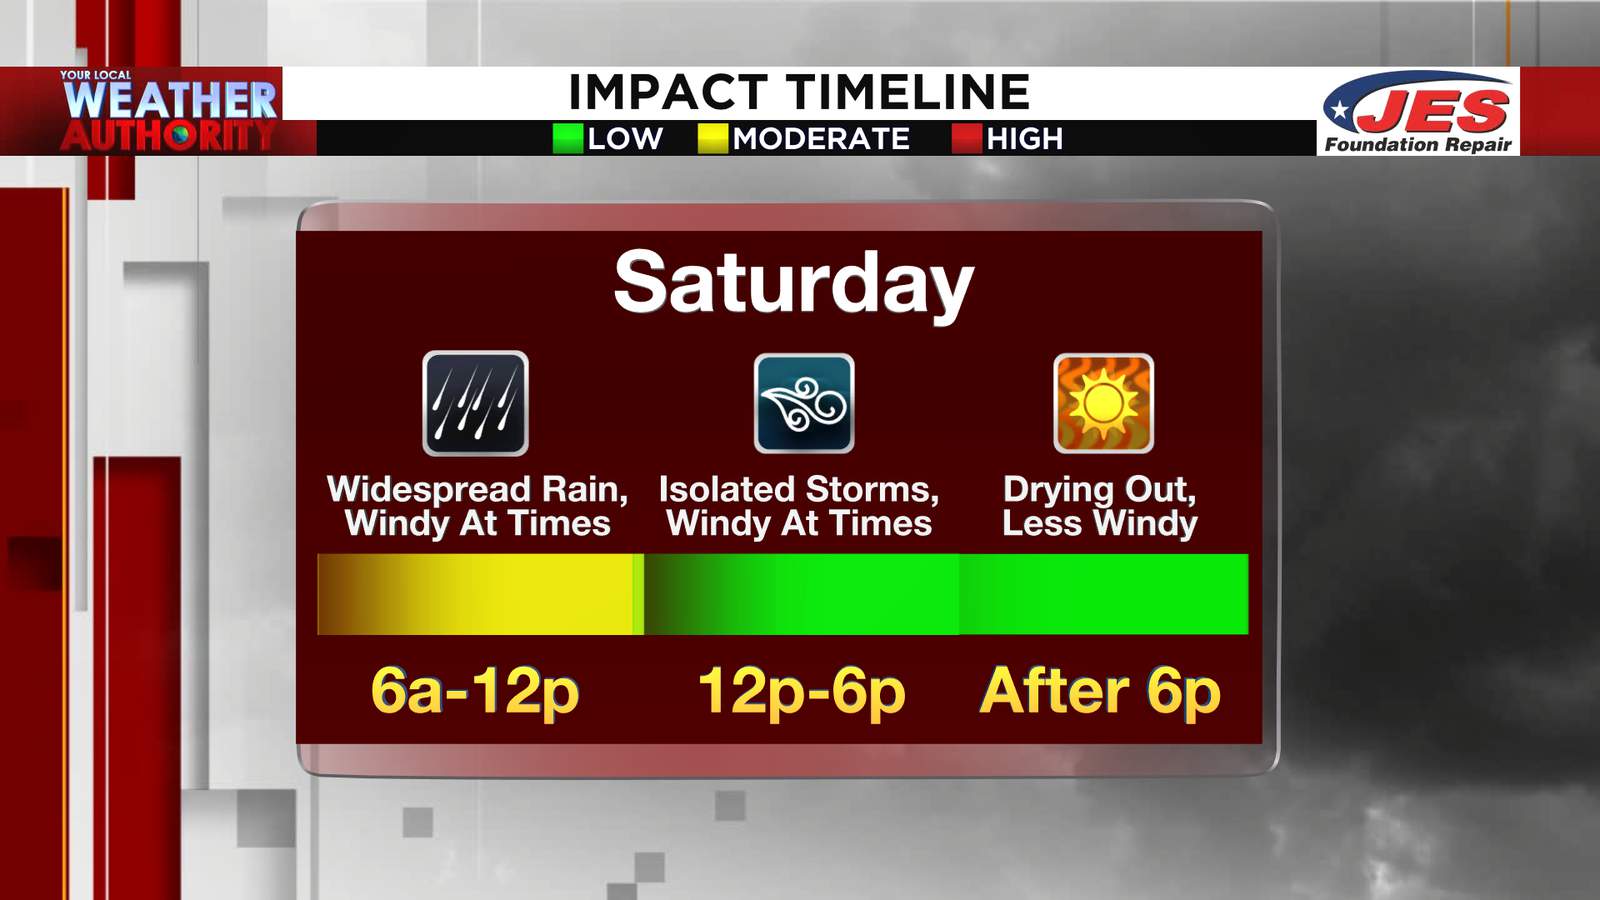 Saturday gets off to a wet and windy start before more pleasant conditions take over